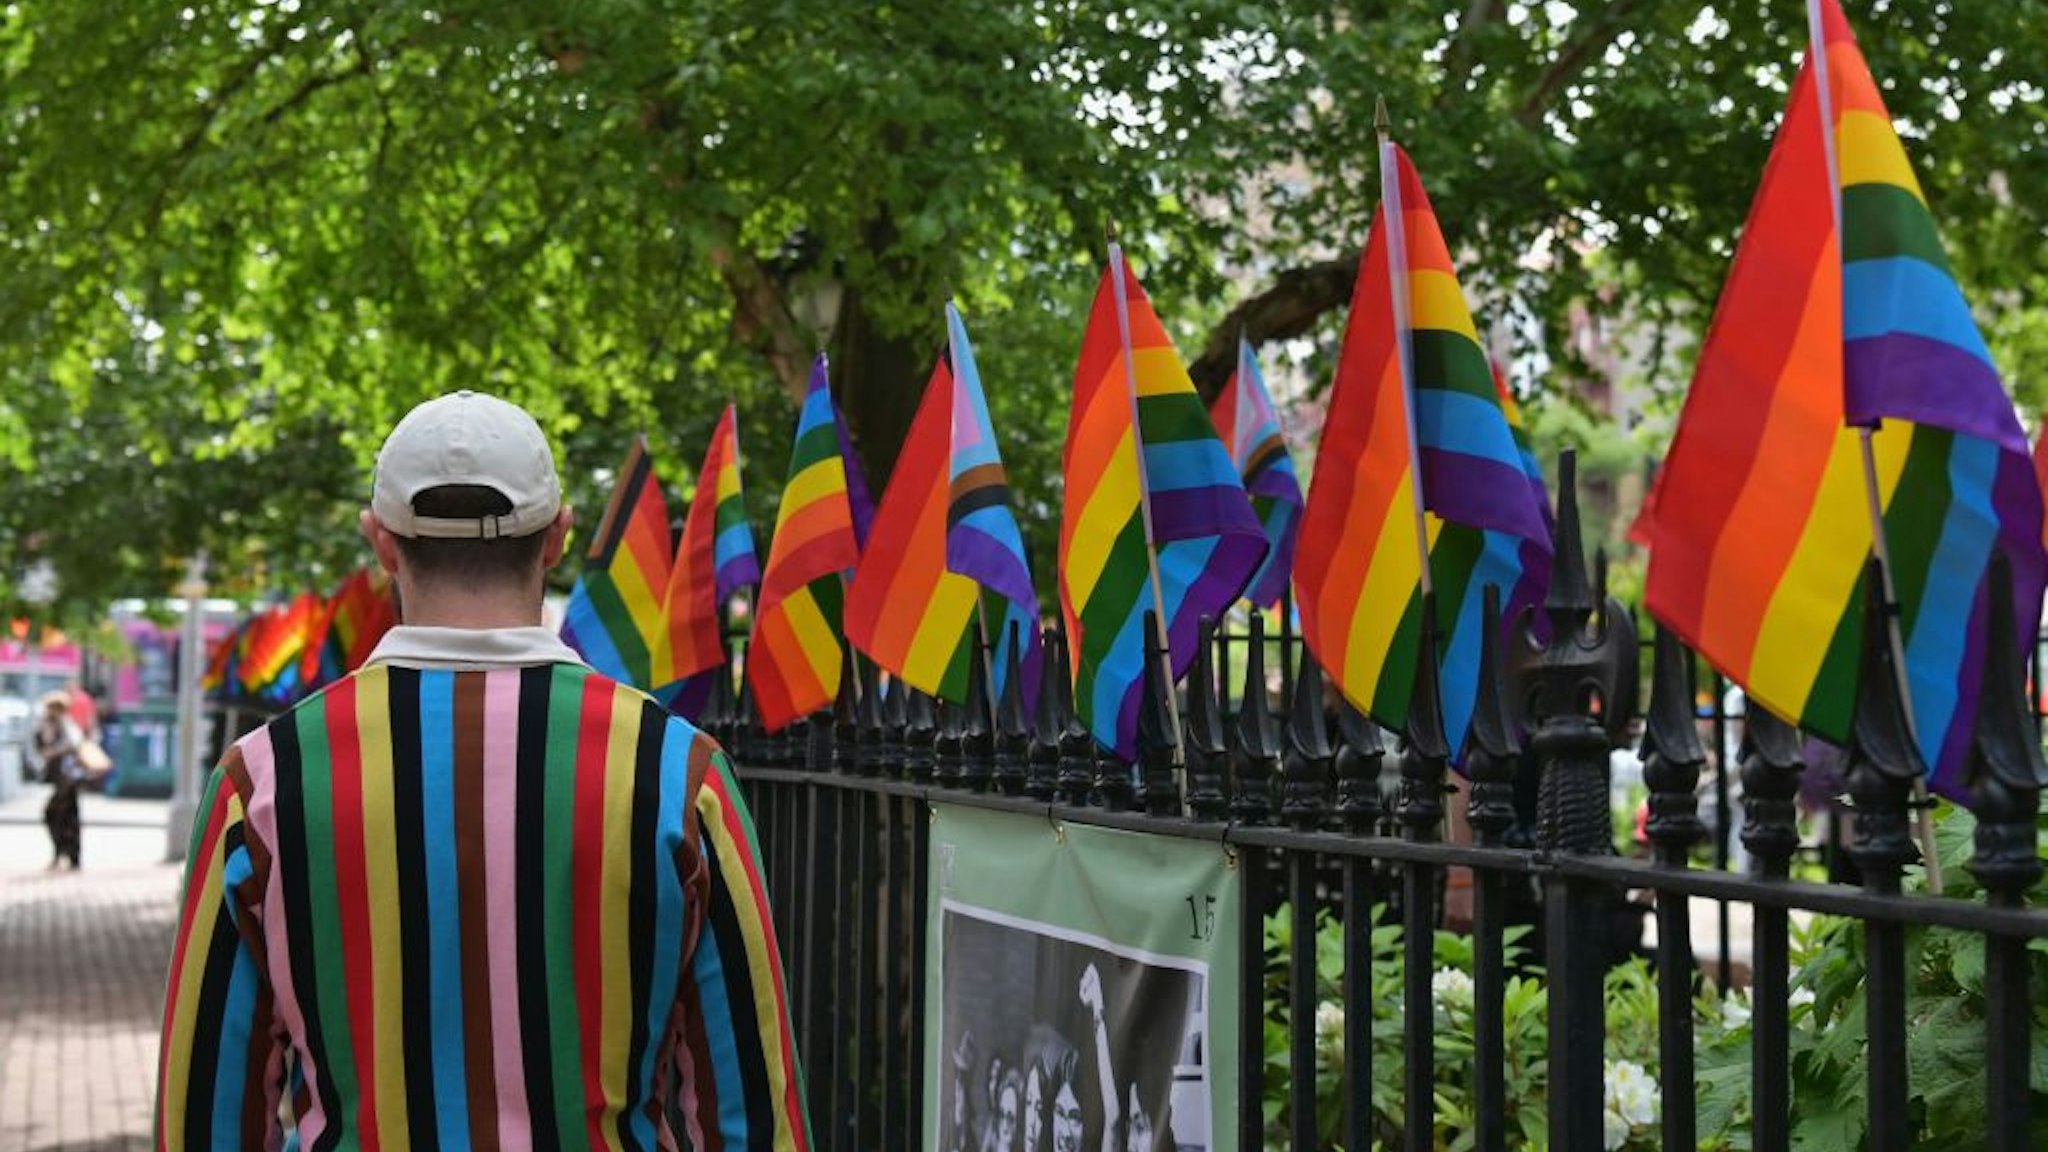 A person wearing a sweater with 'Progress Pride Flag' colors, including rainbow and black and brown stripes for communities of color, walks past rainbow flags at the Stonewall National Monument, the first US national monument dedicated to LGBTQ history and rights, marking the birthplace of the modern lesbian, gay, bisexual, transgender, and queer civil rights movement, on June 1, 2020 in New York City. (Photo by Angela Weiss / AFP) (Photo by ANGELA WEISS/AFP via Getty Images)